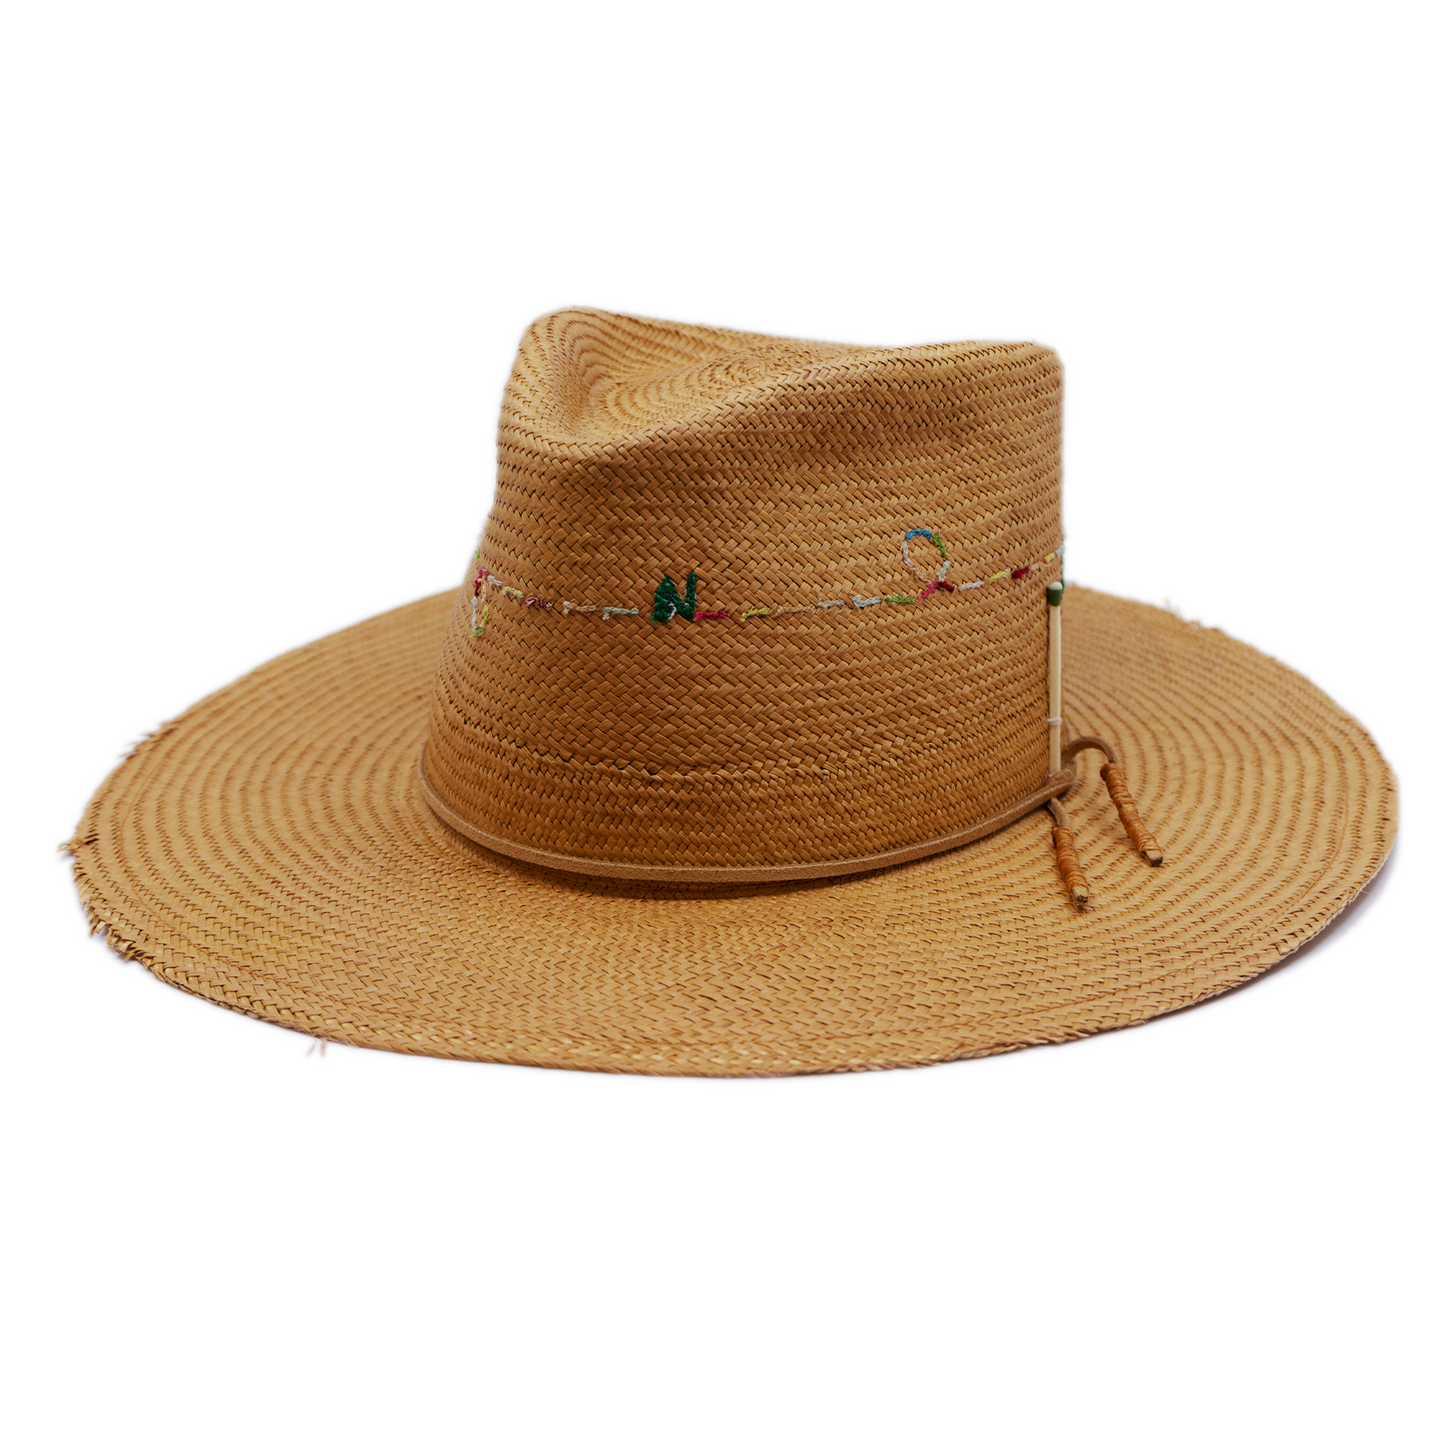 100% Ecuadorian straw in Natural Brown  Suede cord with japanese wax   thread ends band  Multicolor N—-F embroidery around crown   Woven in Ecuador  Lightly frayed brim  Made in USA  